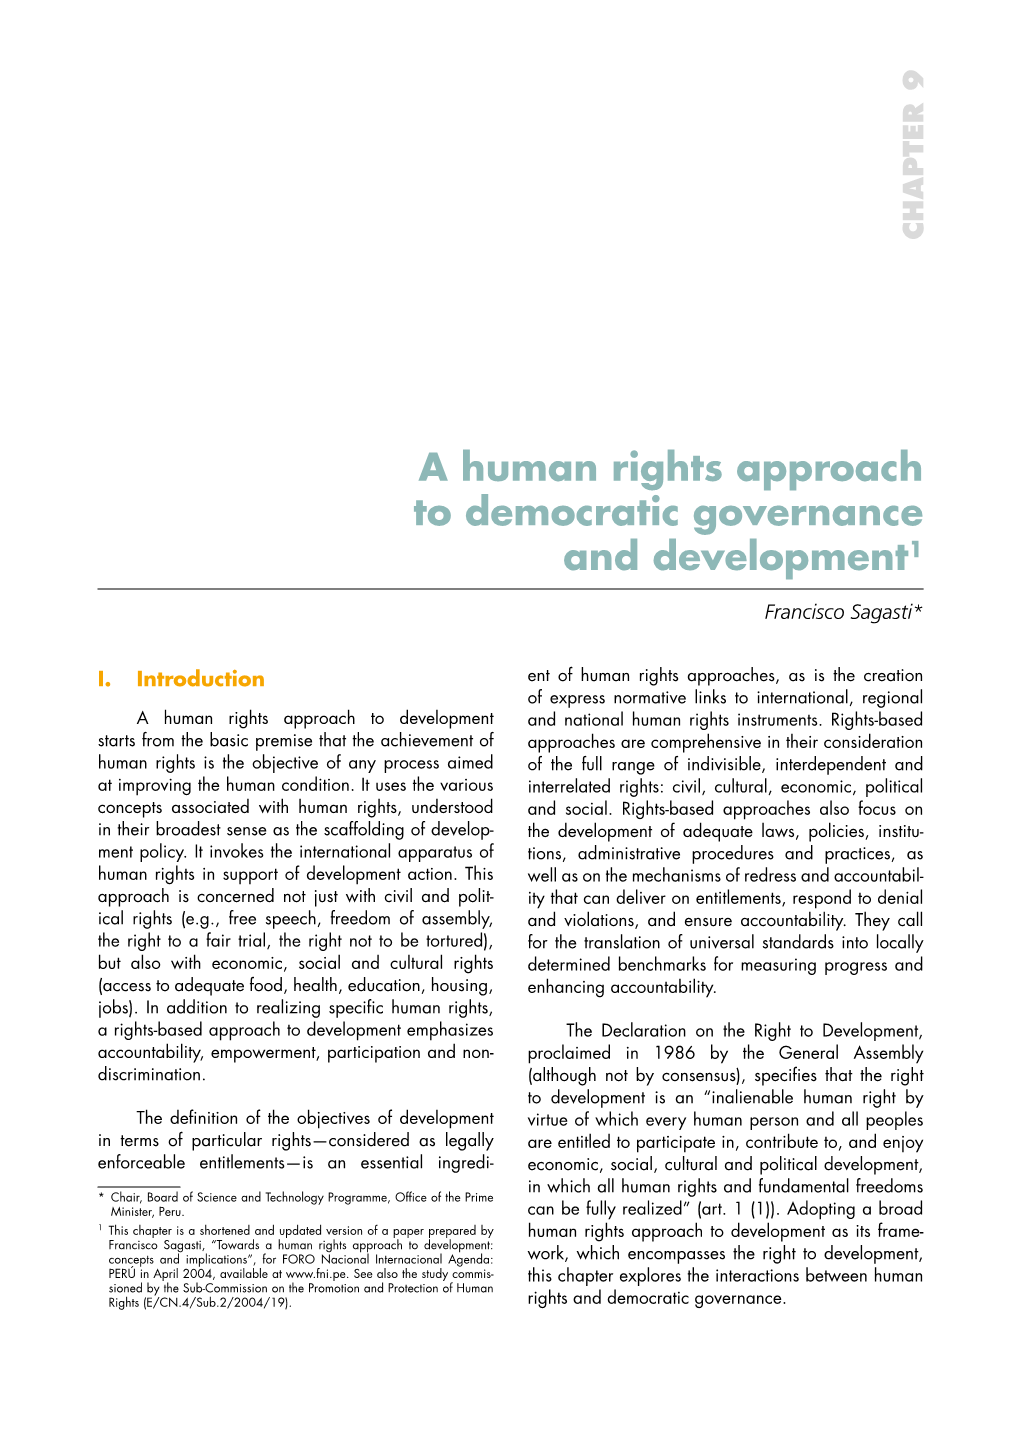 A Human Rights Approach to Democratic Governance and Development1